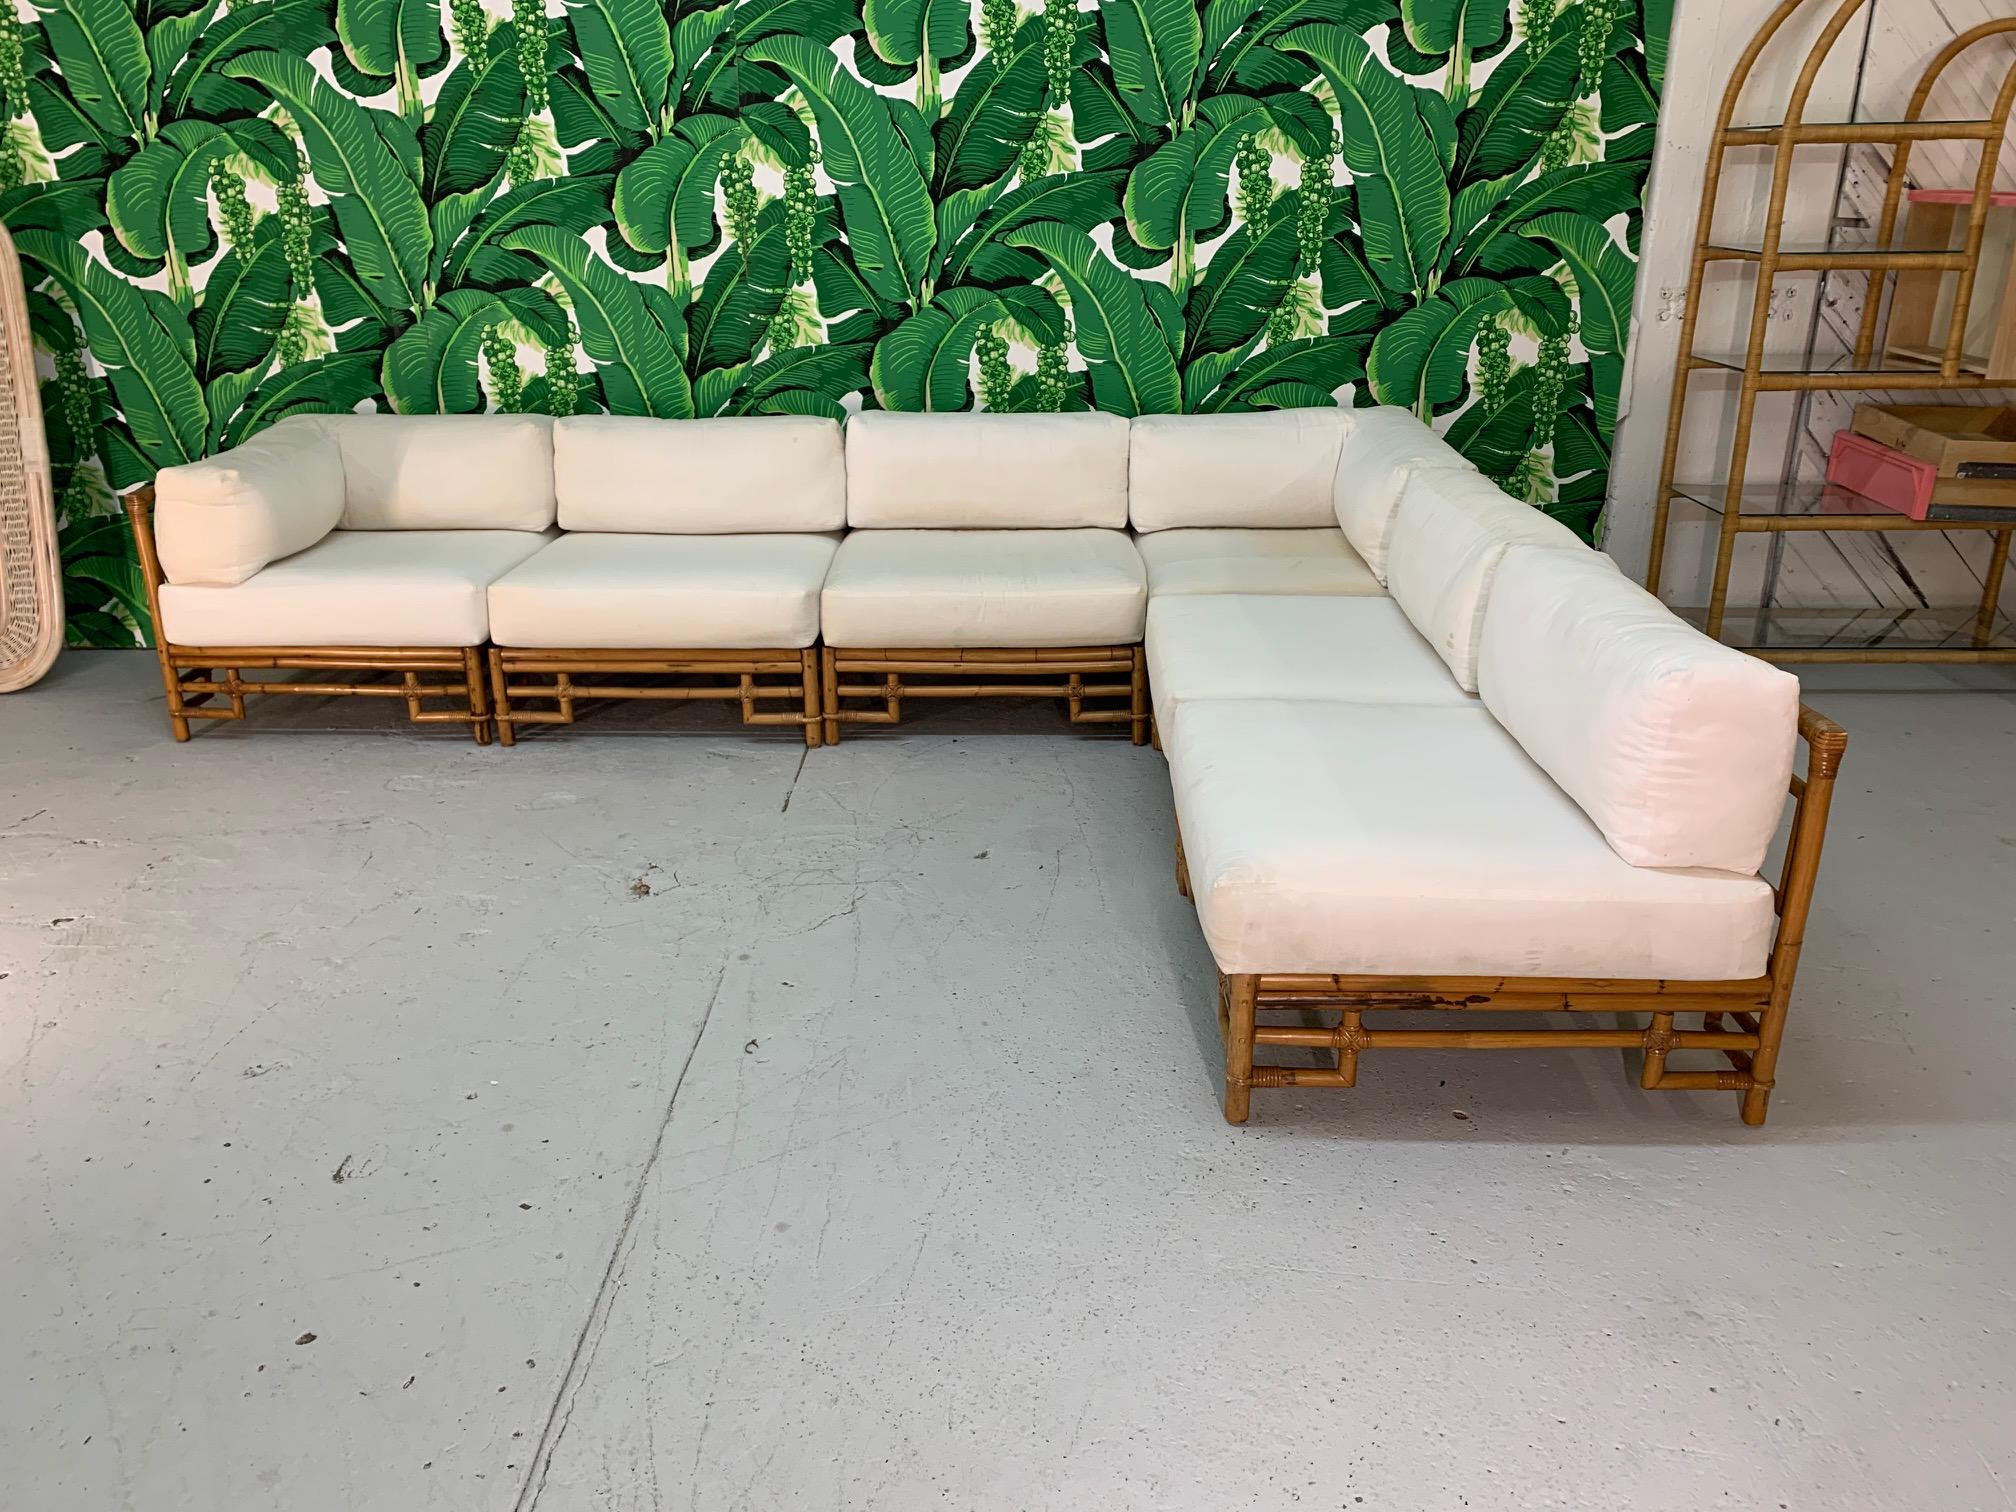 Large six piece modular sectional sofa by Ficks Reed features rattan frame and chinoiserie style design. Cushions are muslin covered and ready for your upholstery. We offer custom upholstery services as well. Very good condition, structurally very